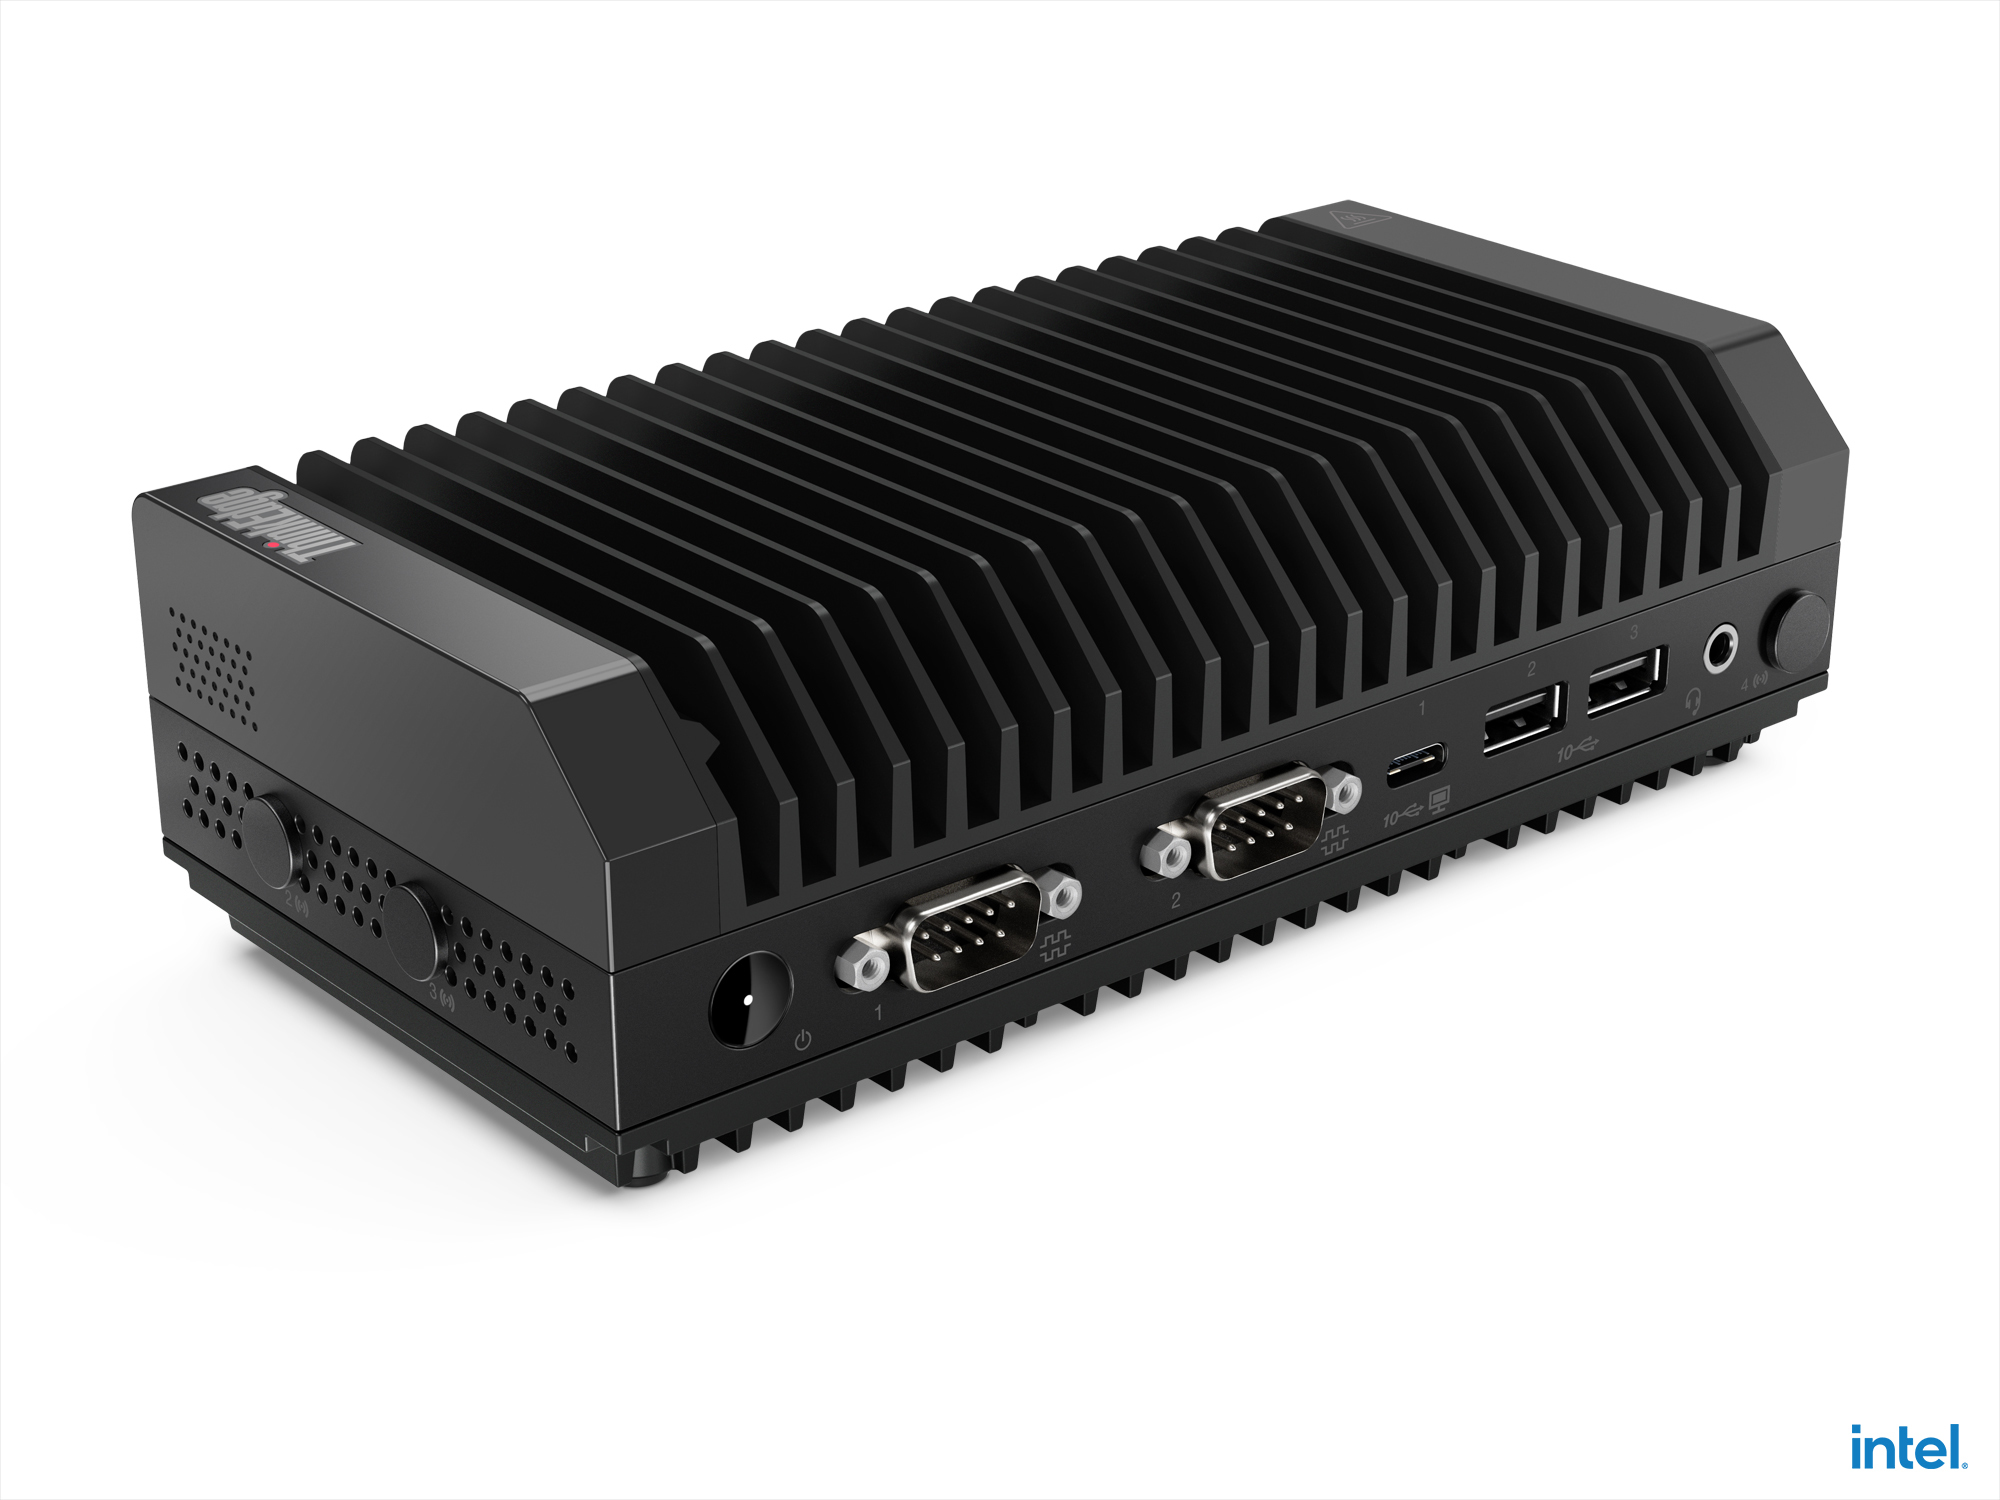 Intel Set to Exit NUC PC Business - Pushes Partners to Develop